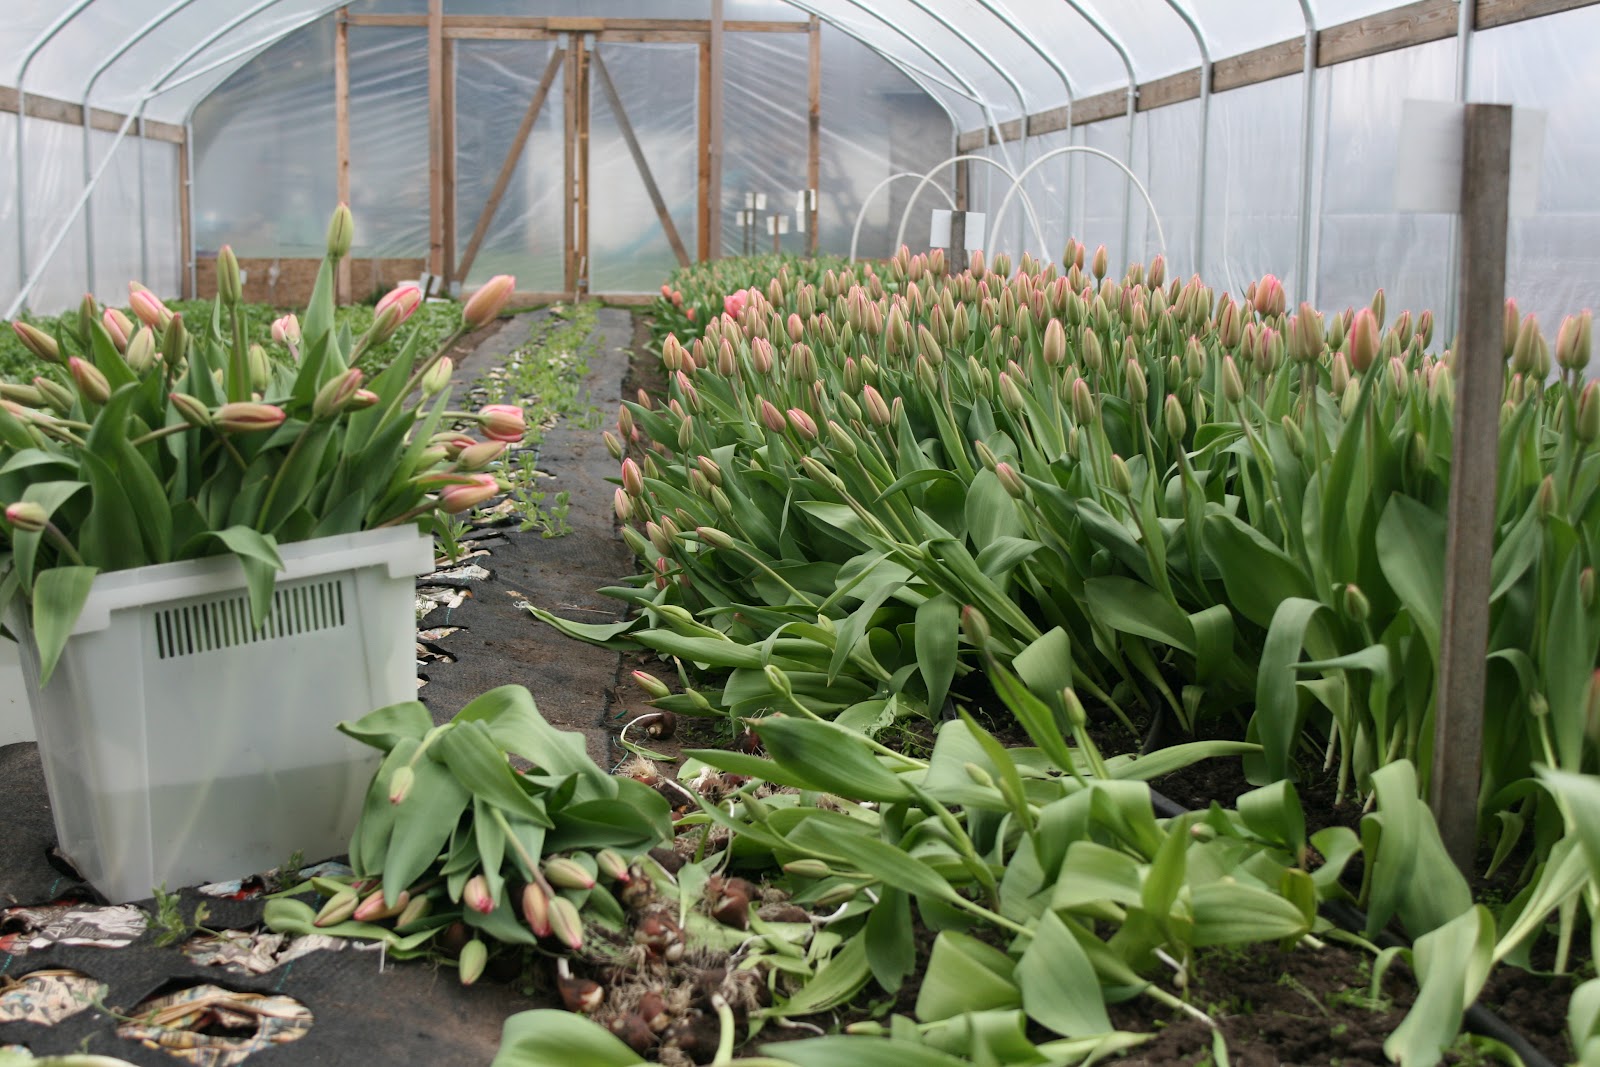 Harvesting tulips in the greenhouse